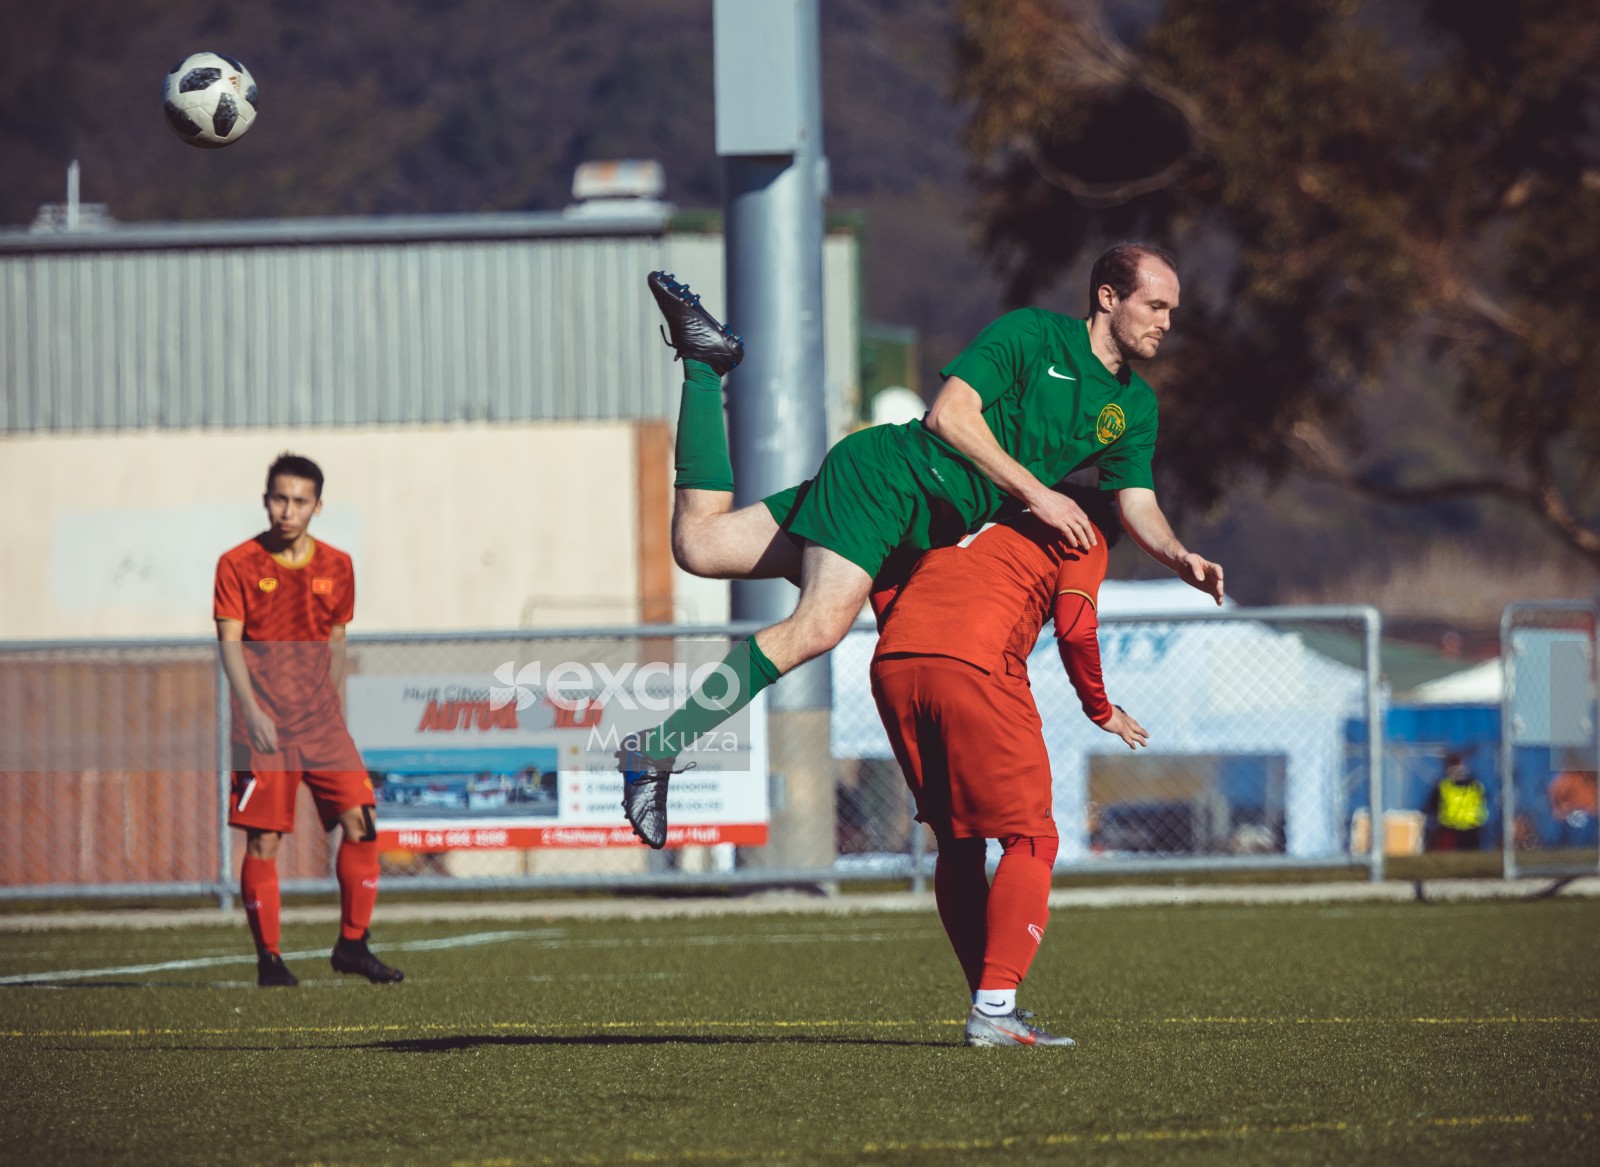 Player in green kit mounts opponent's shoulder during a jump - Sports Zone sunday league